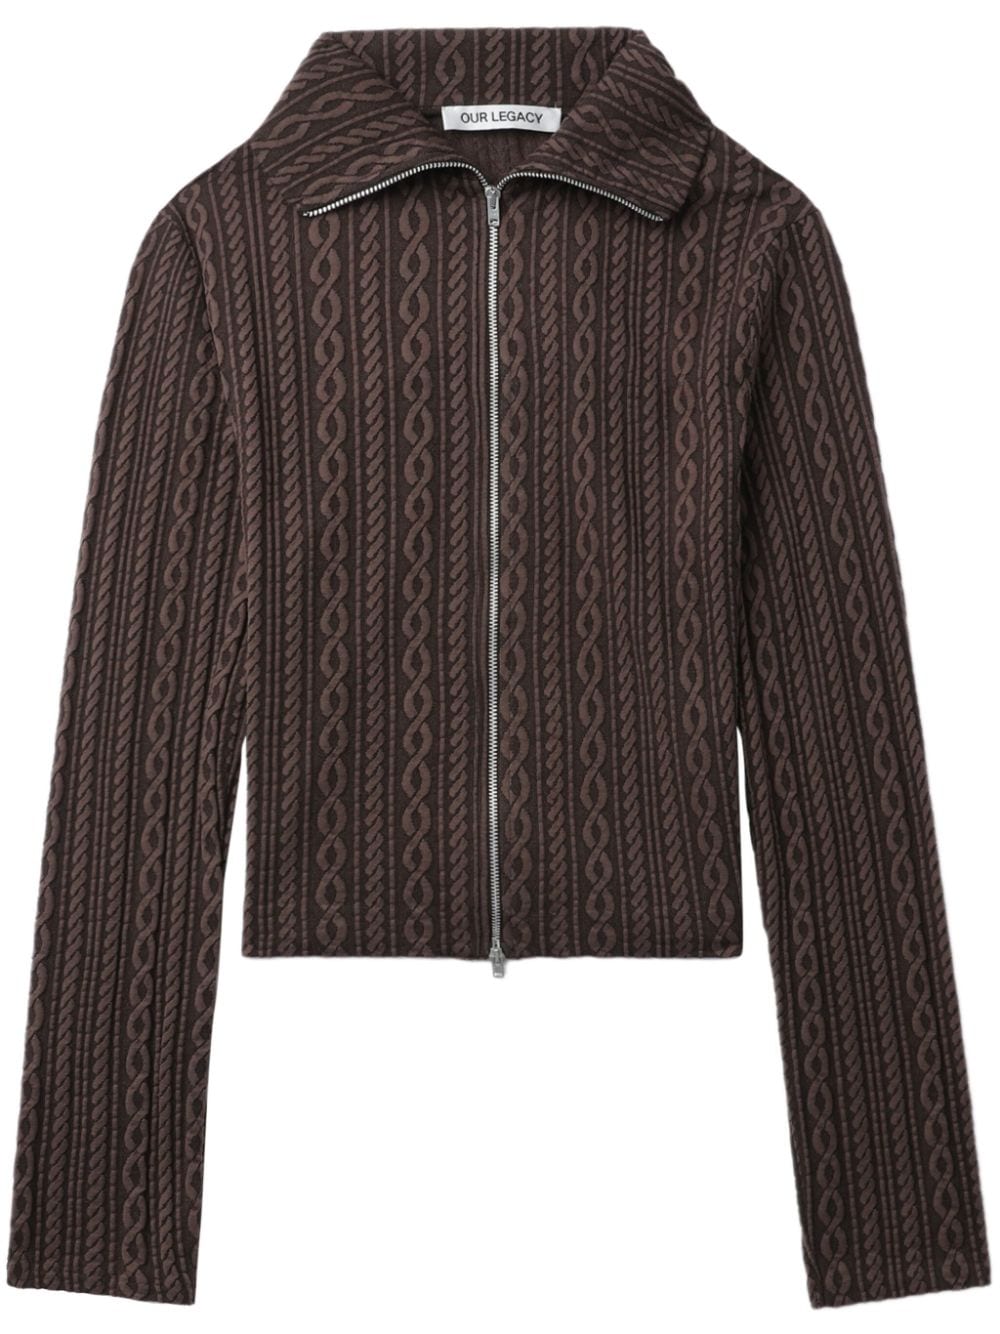 OUR LEGACY patterned-jacquard cardigan - Brown von OUR LEGACY